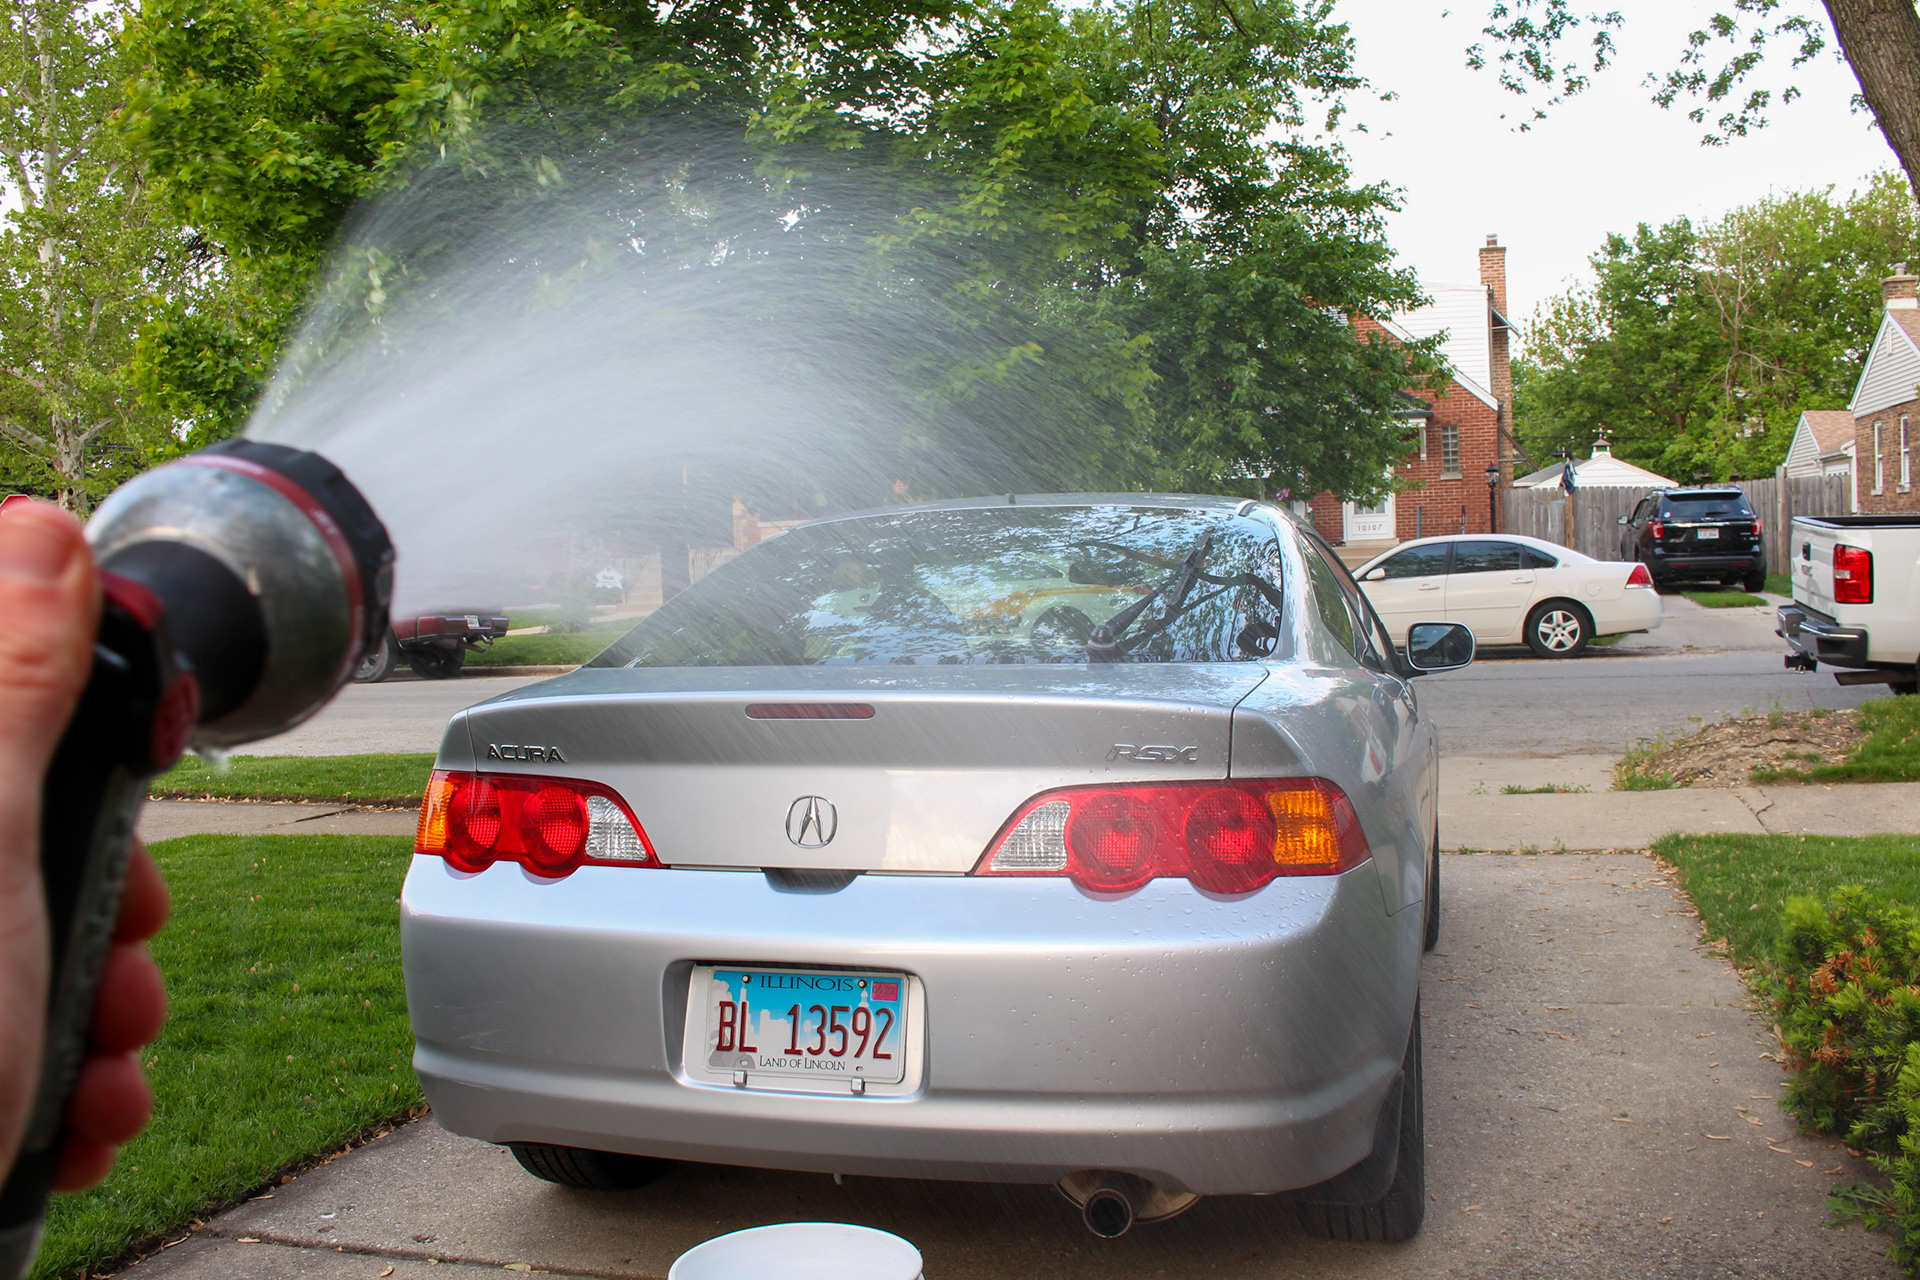 A to Z: How To Give Your Car A Complete Wash! - Chemical Guys 